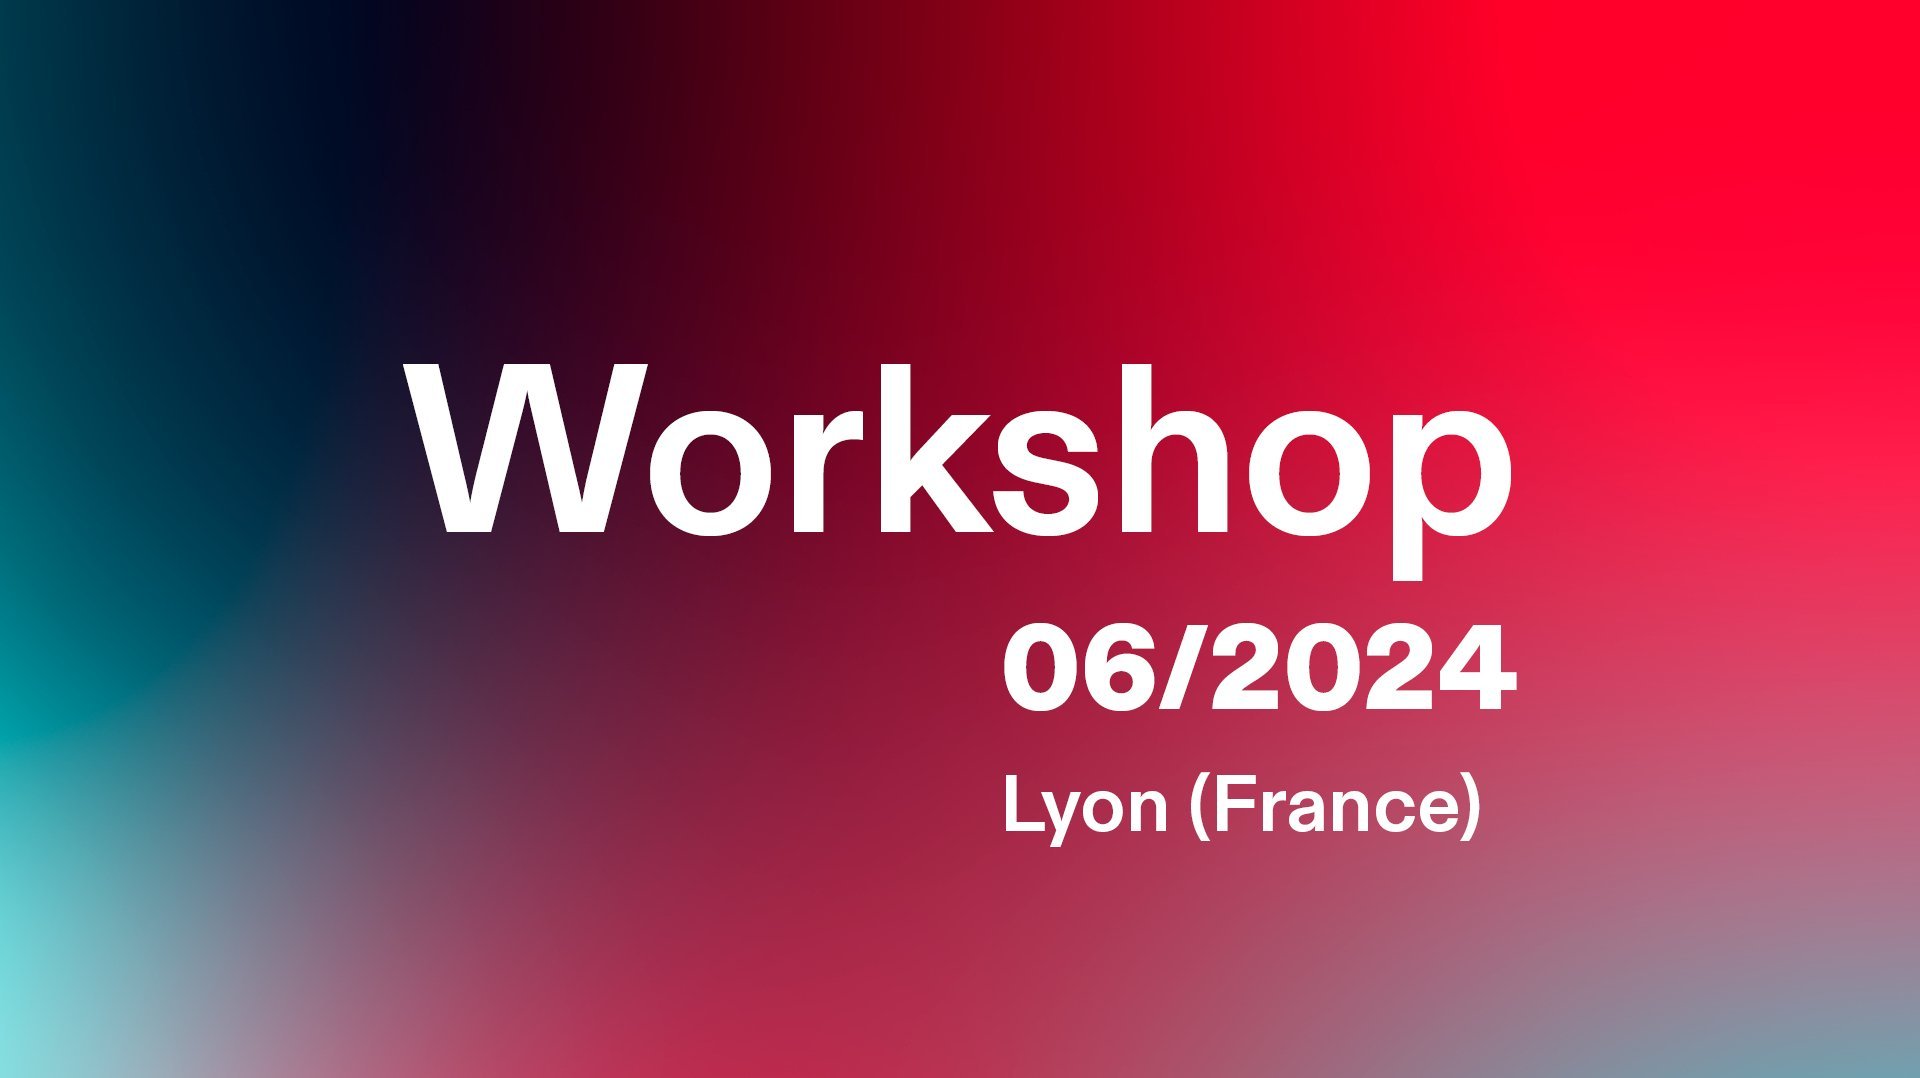 Banner of the IIoT Workshop in Lyon, France in white letters on colorful background.